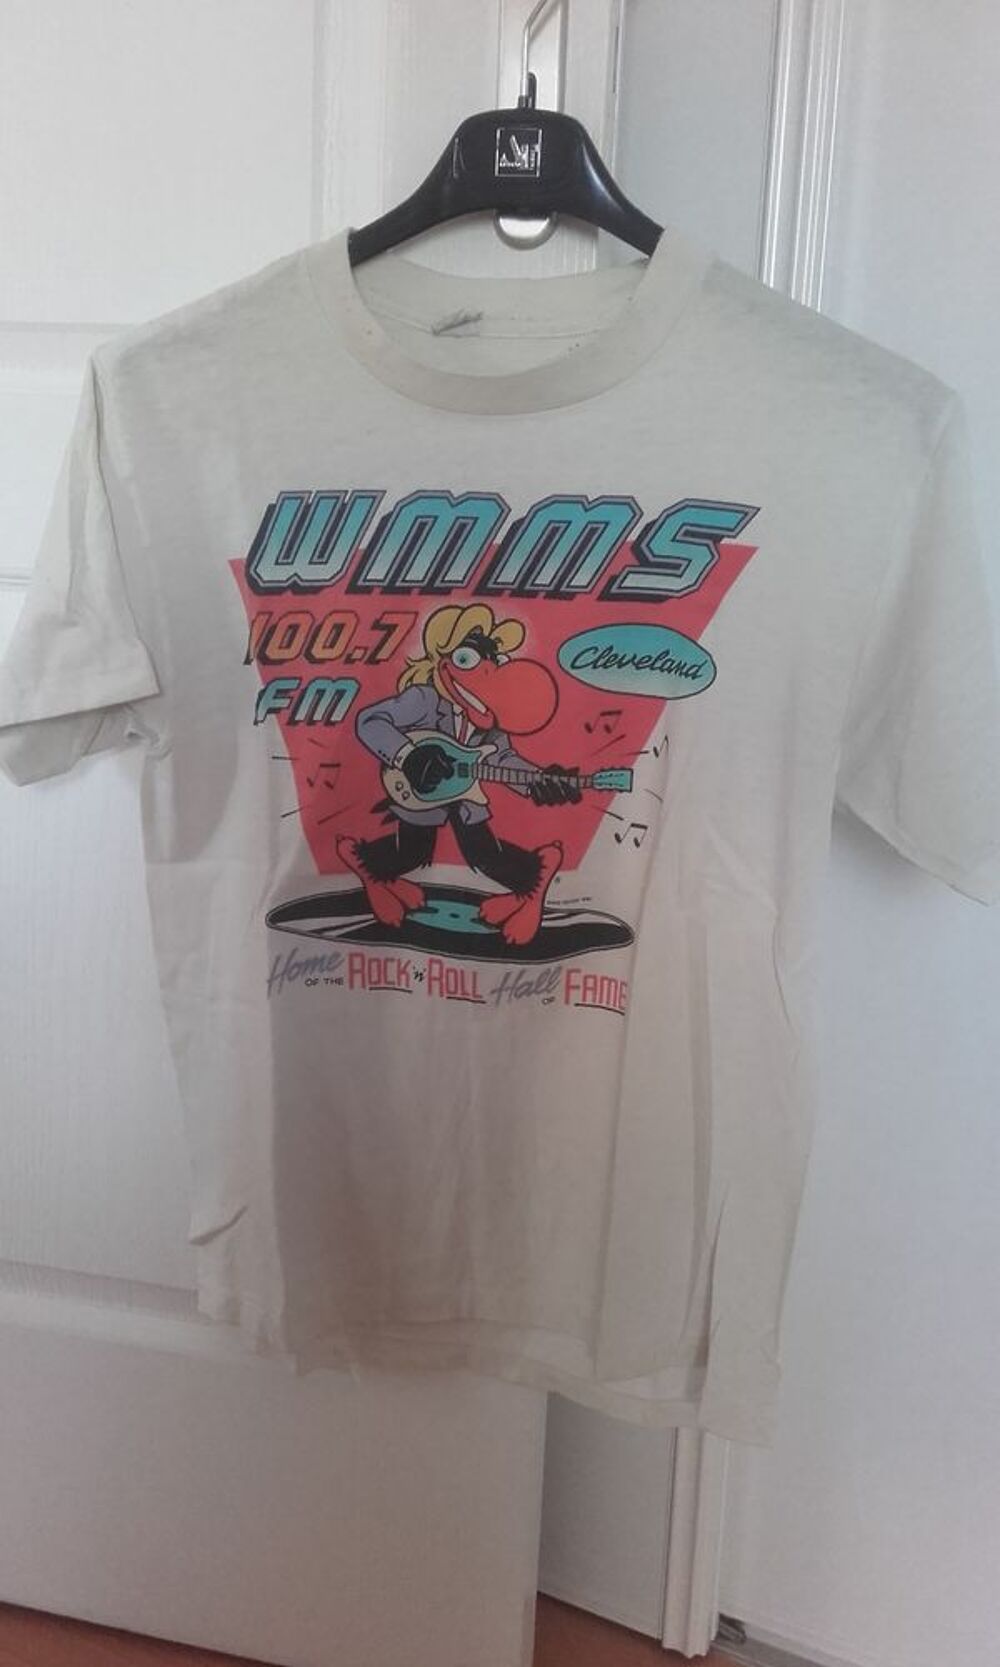 T-Shirt : WMMS 100.7 FM Rock Radio Cleveland - Taille L Vtements